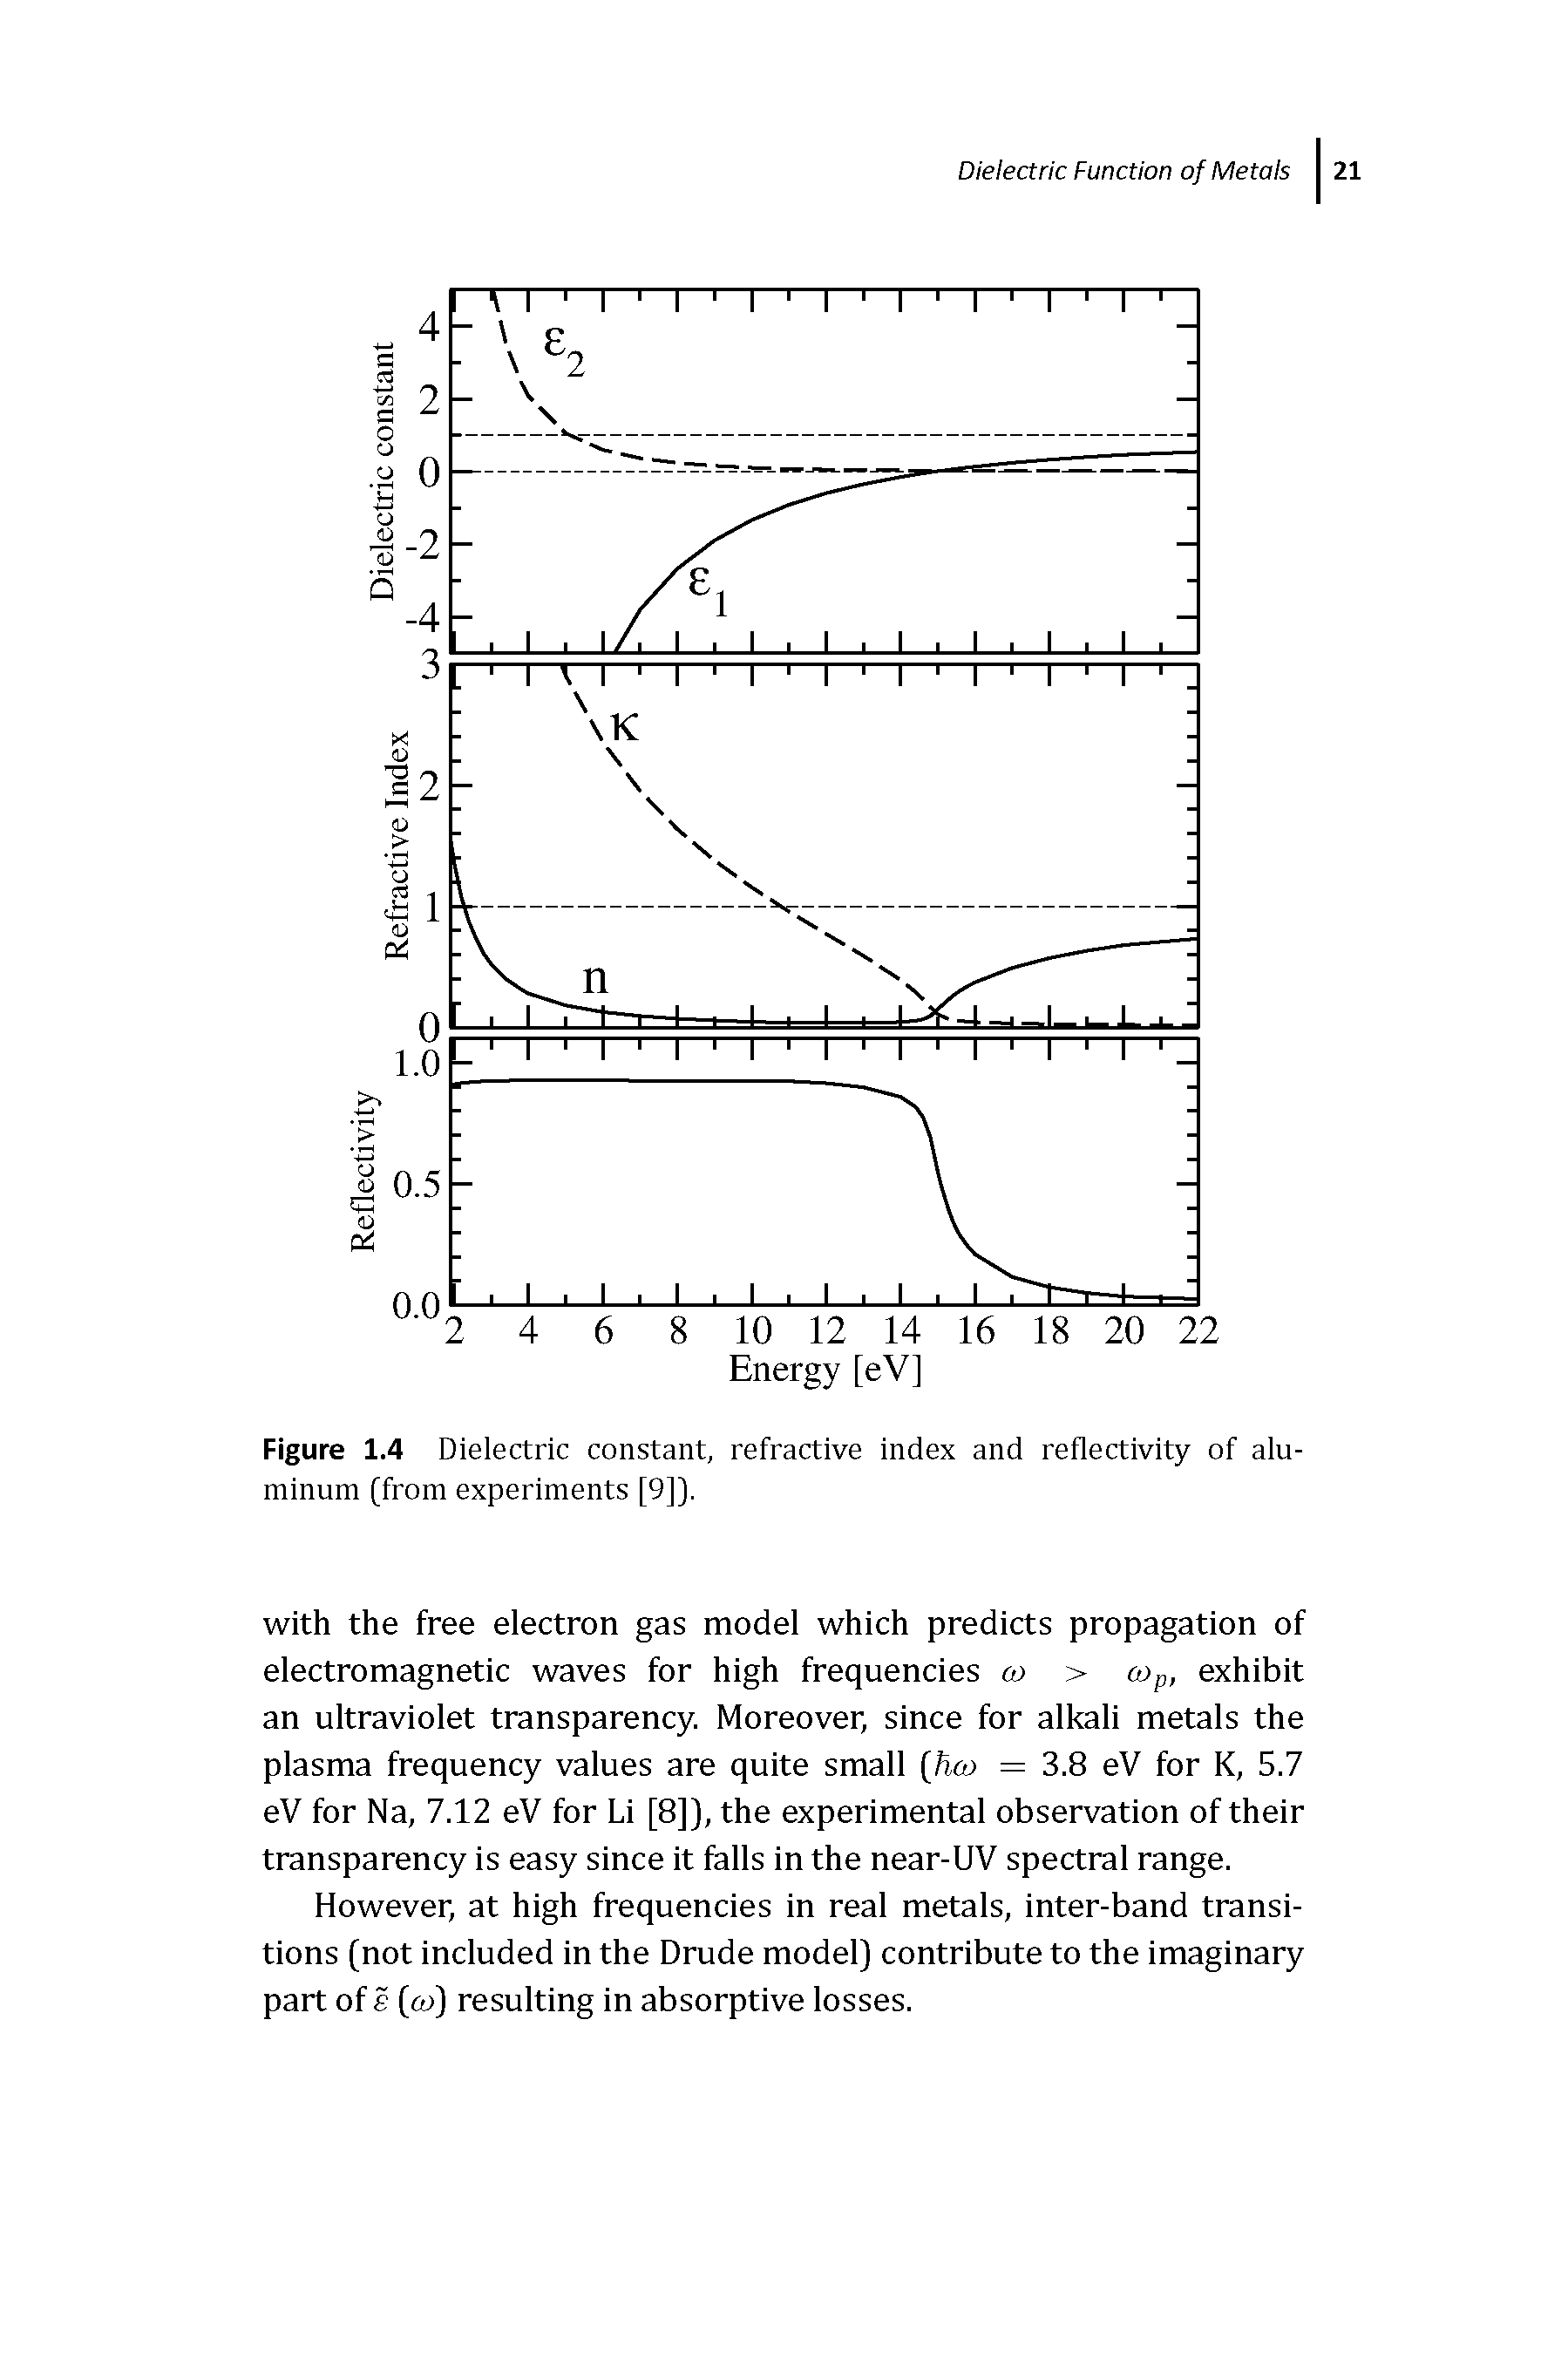 Figure 1.4 Dielectric constant, refractive index and reflectivity of aluminum [from experiments [9]].